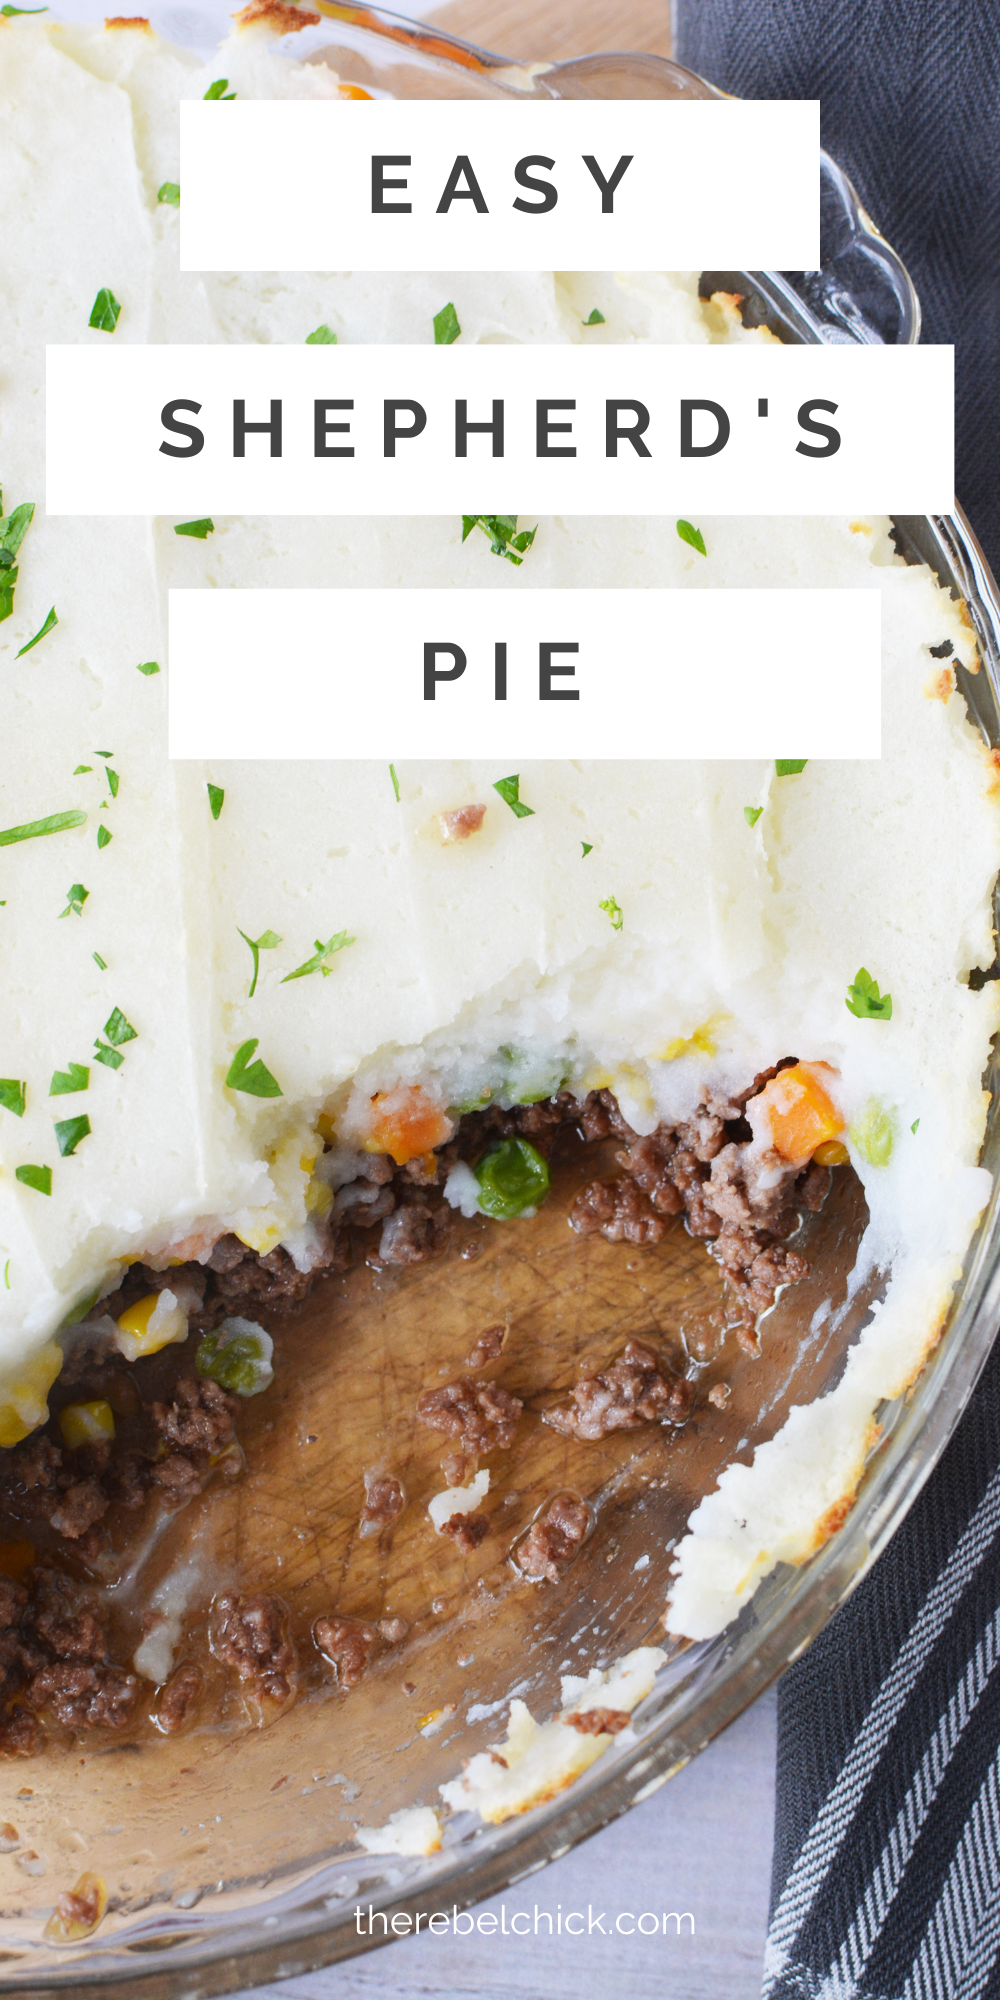 How to Make The Easiest Recipe for Shepherd's Pie